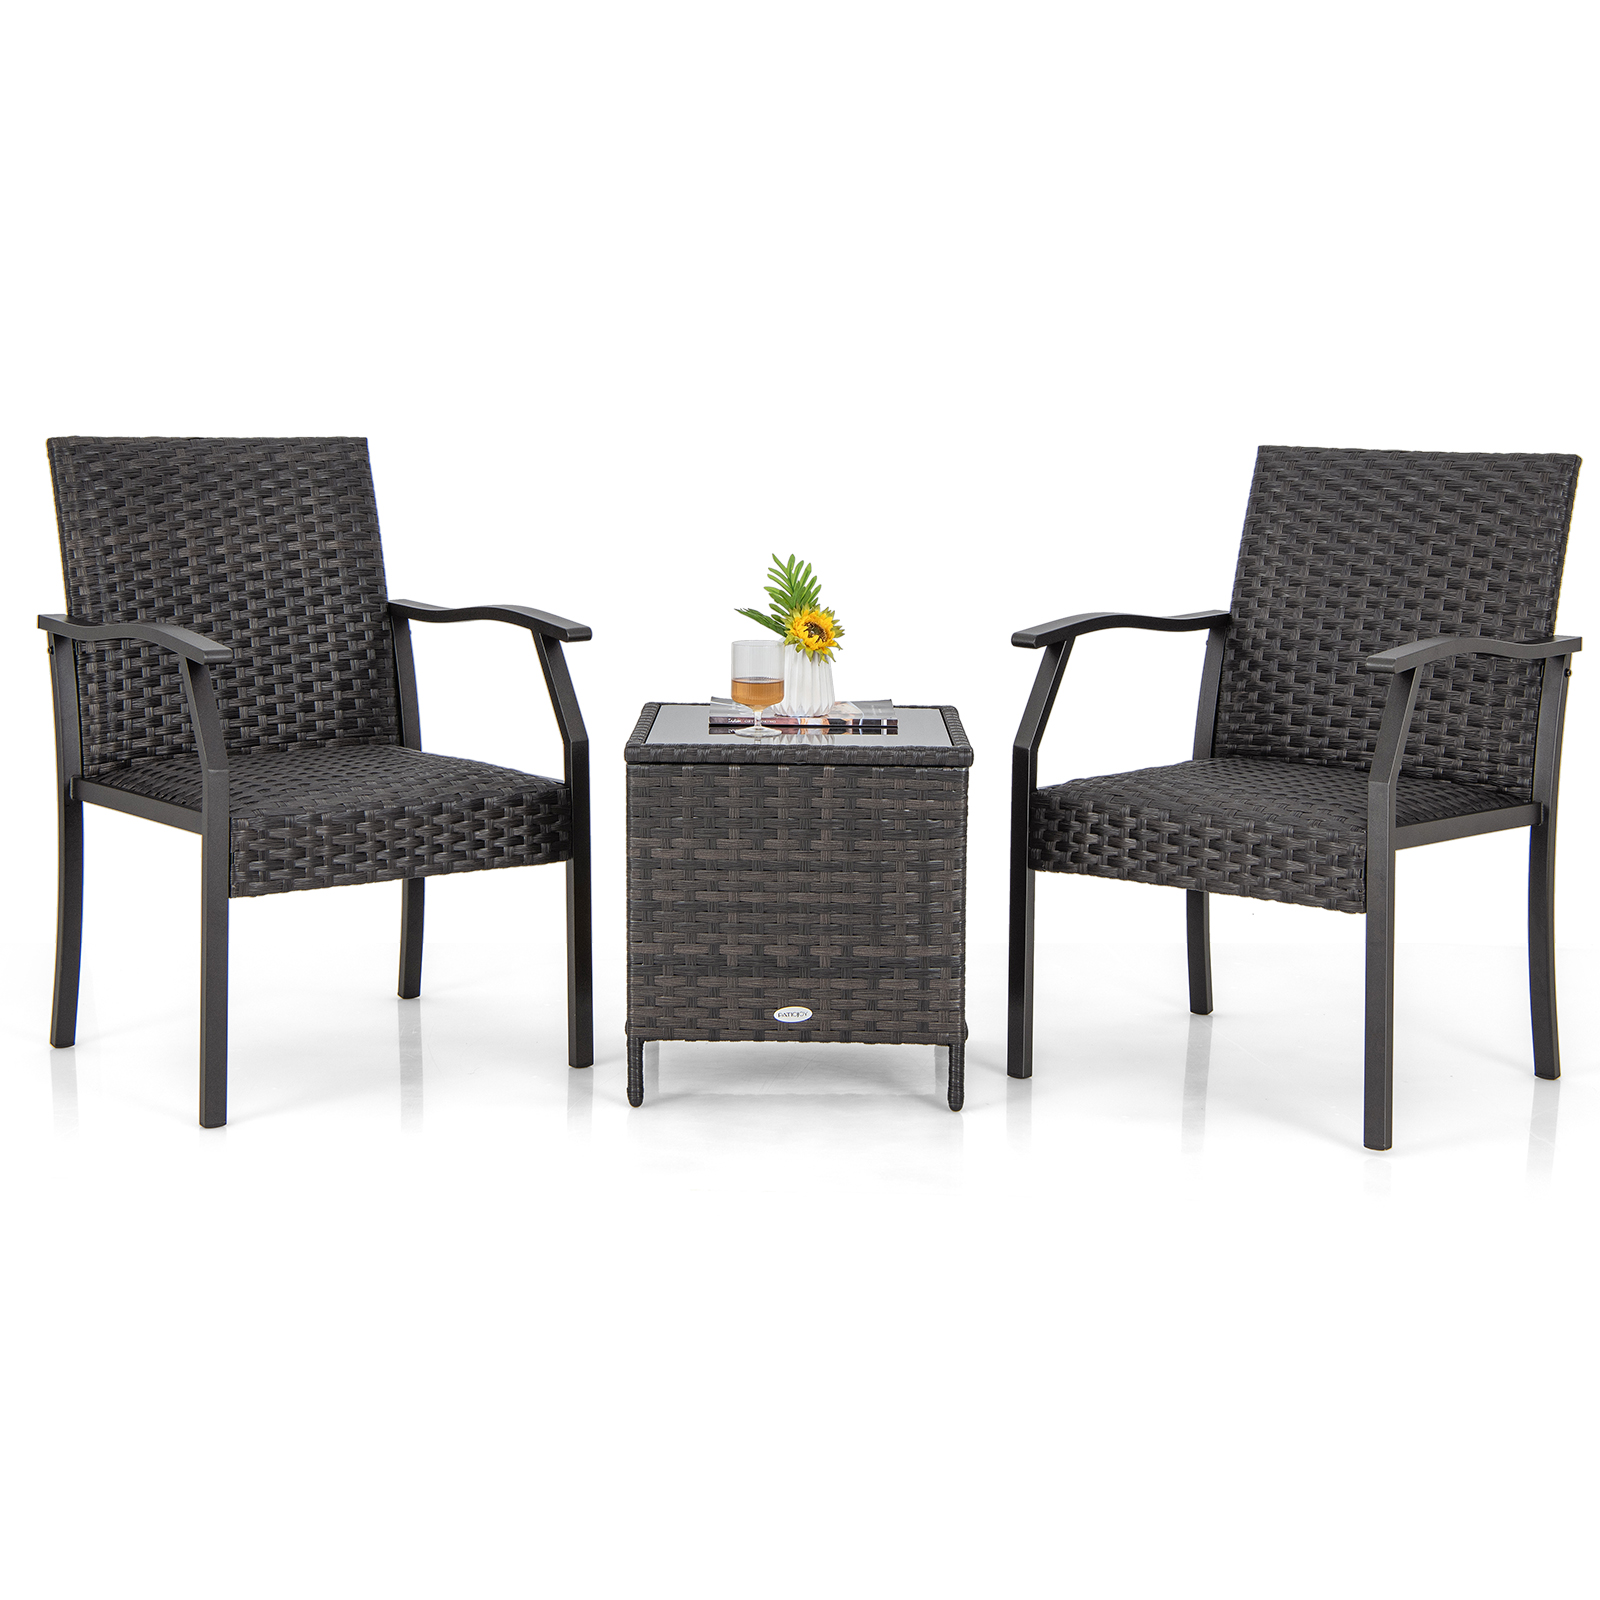 3_Piece_Patio_Wicker_Chair_Set_with_Cushioned_Seat-1.jpg